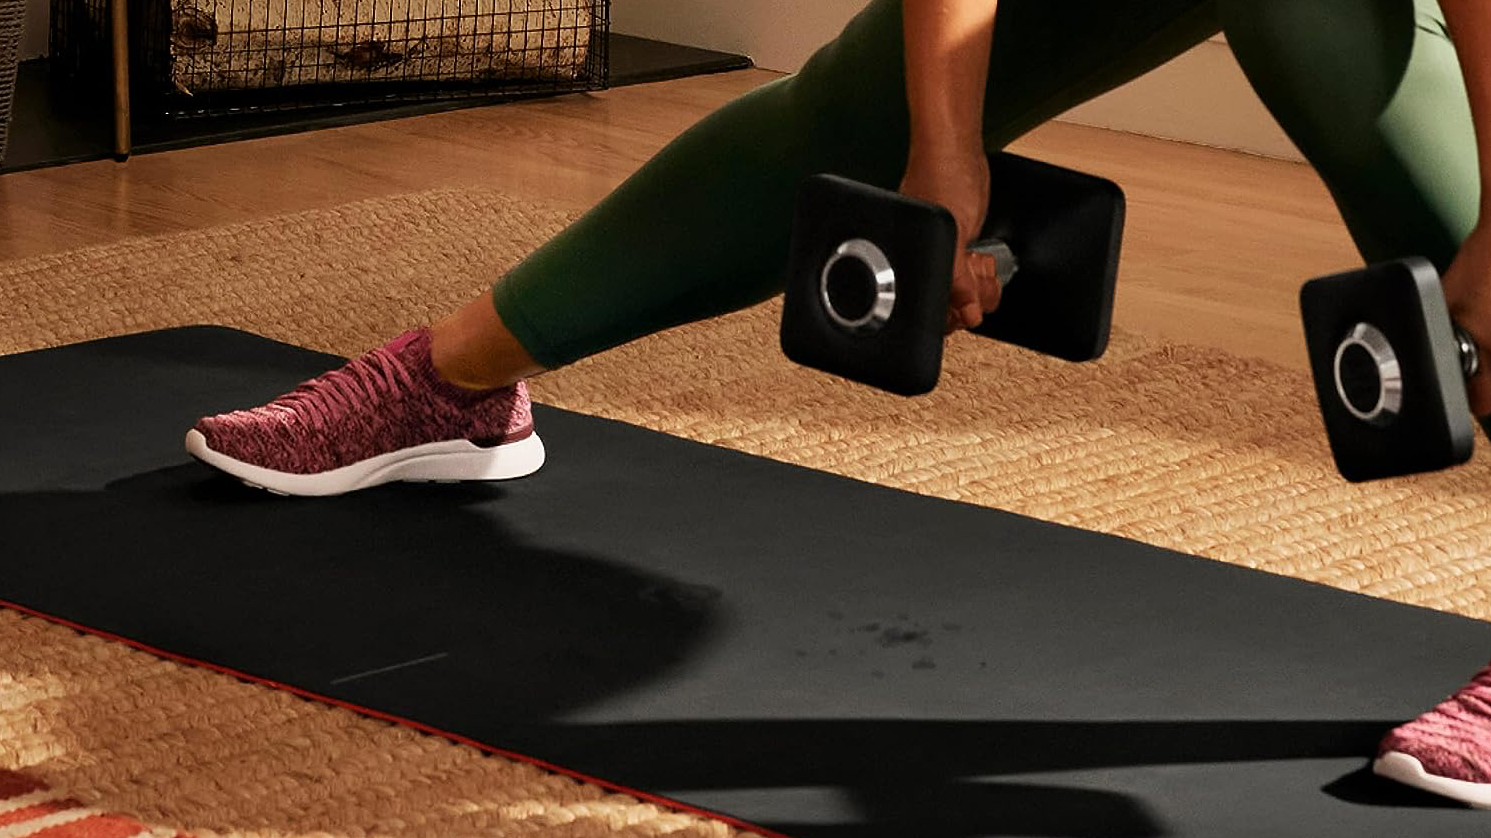 This Peloton workout mat is down 40% to its lowest-ever price